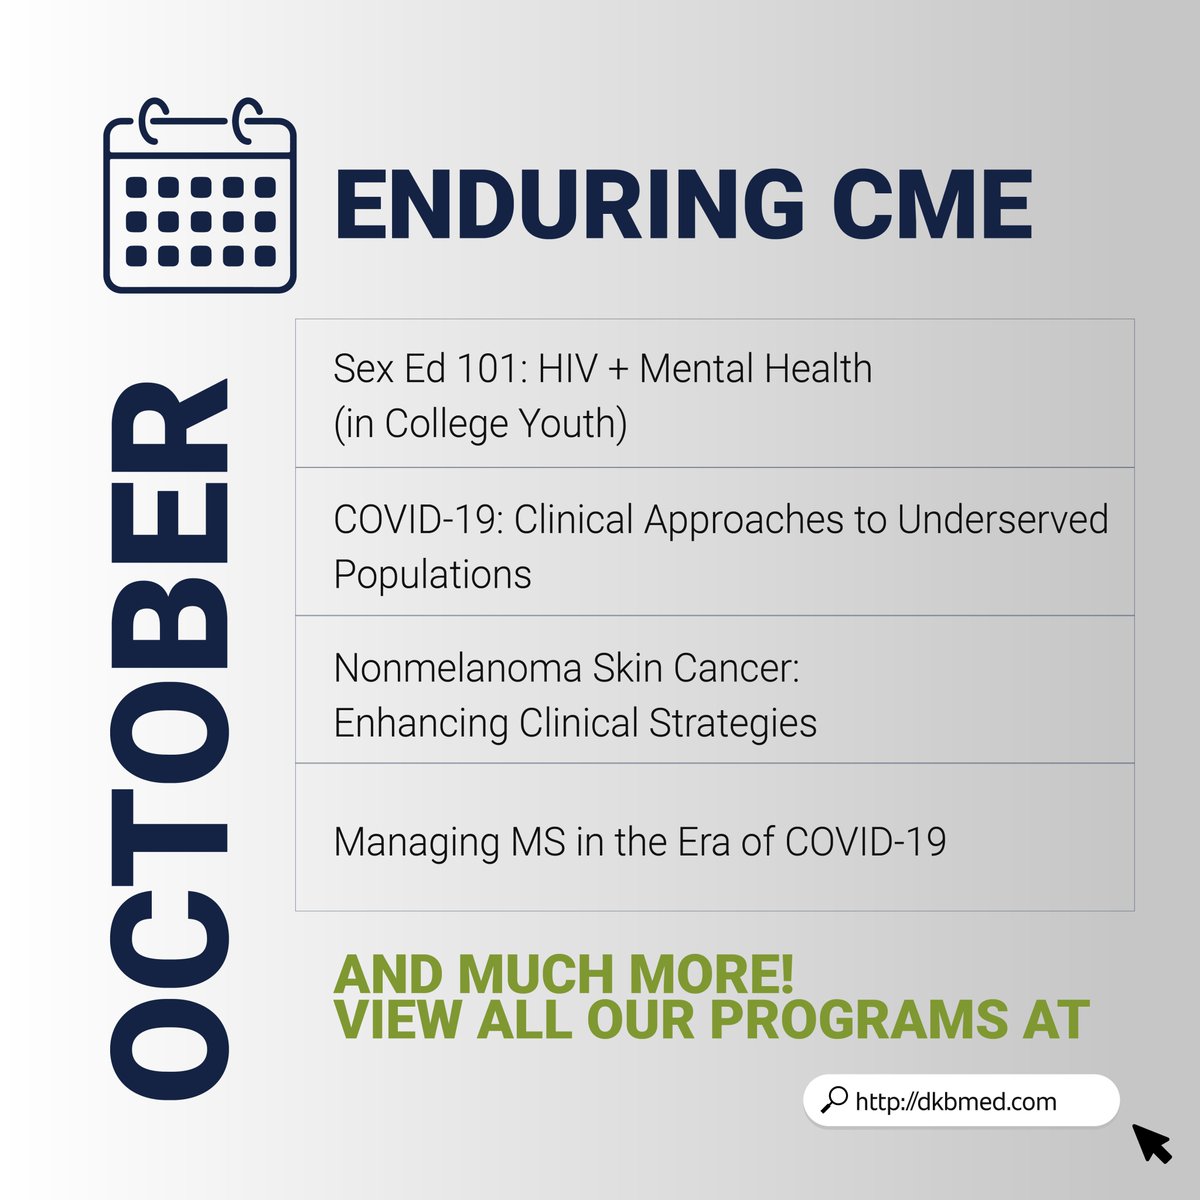 Join us for our CME programs this week! 🙌#HealthCare #CME #FreeCME #MedicalEducation #MedicalNews #HealthNews #CMEcredits #ContinuingEducation